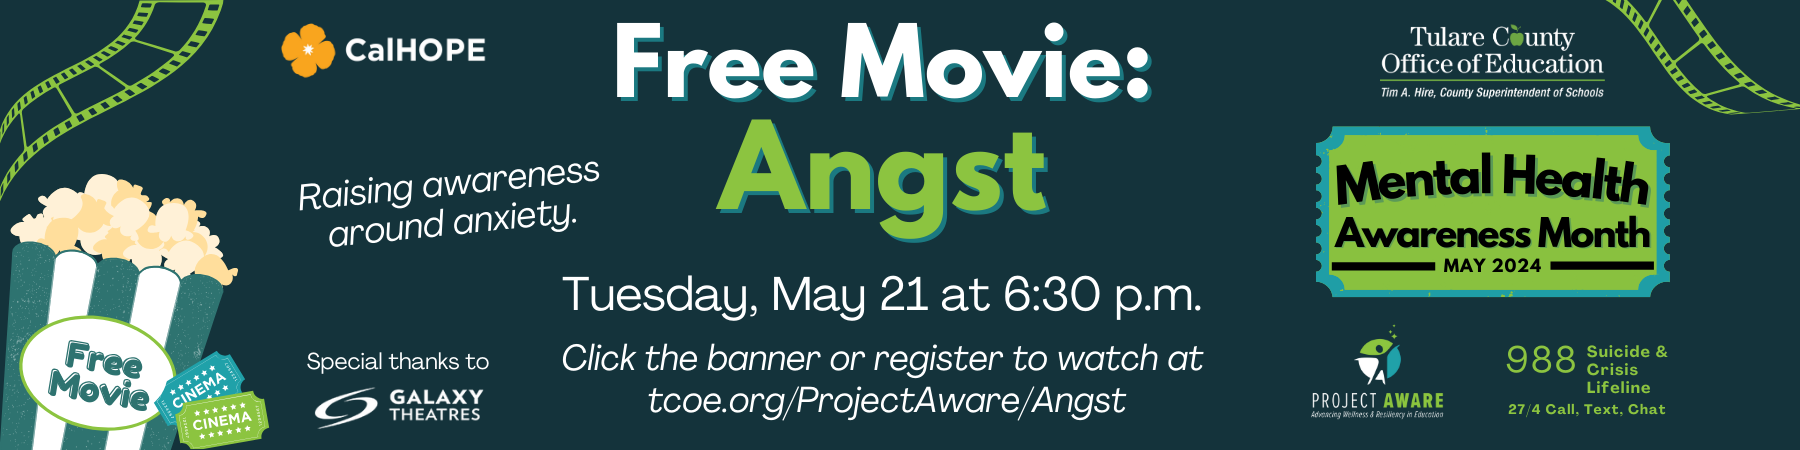 Come see Angst on May 21